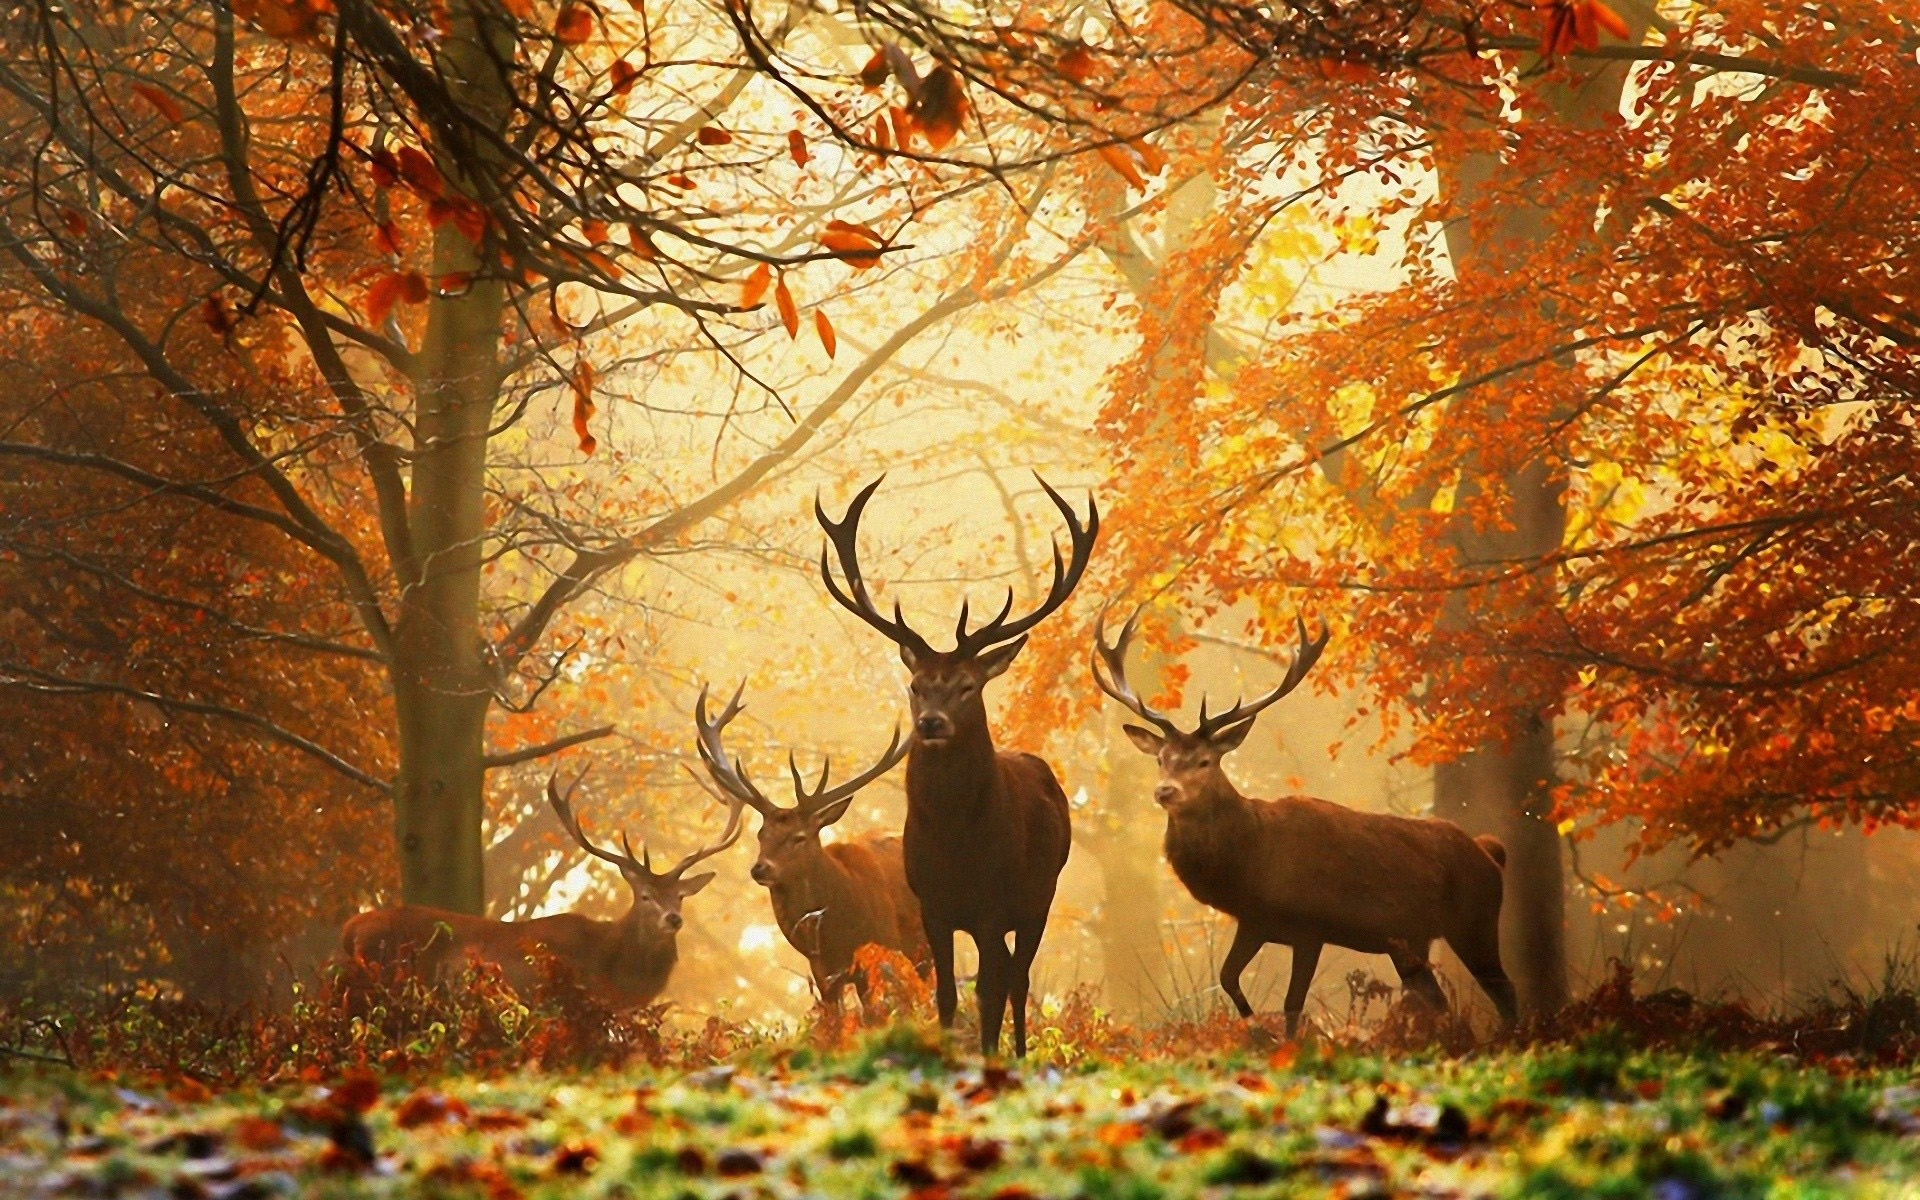 Deer In The Woods Wallpaper And Image Pictures Photos